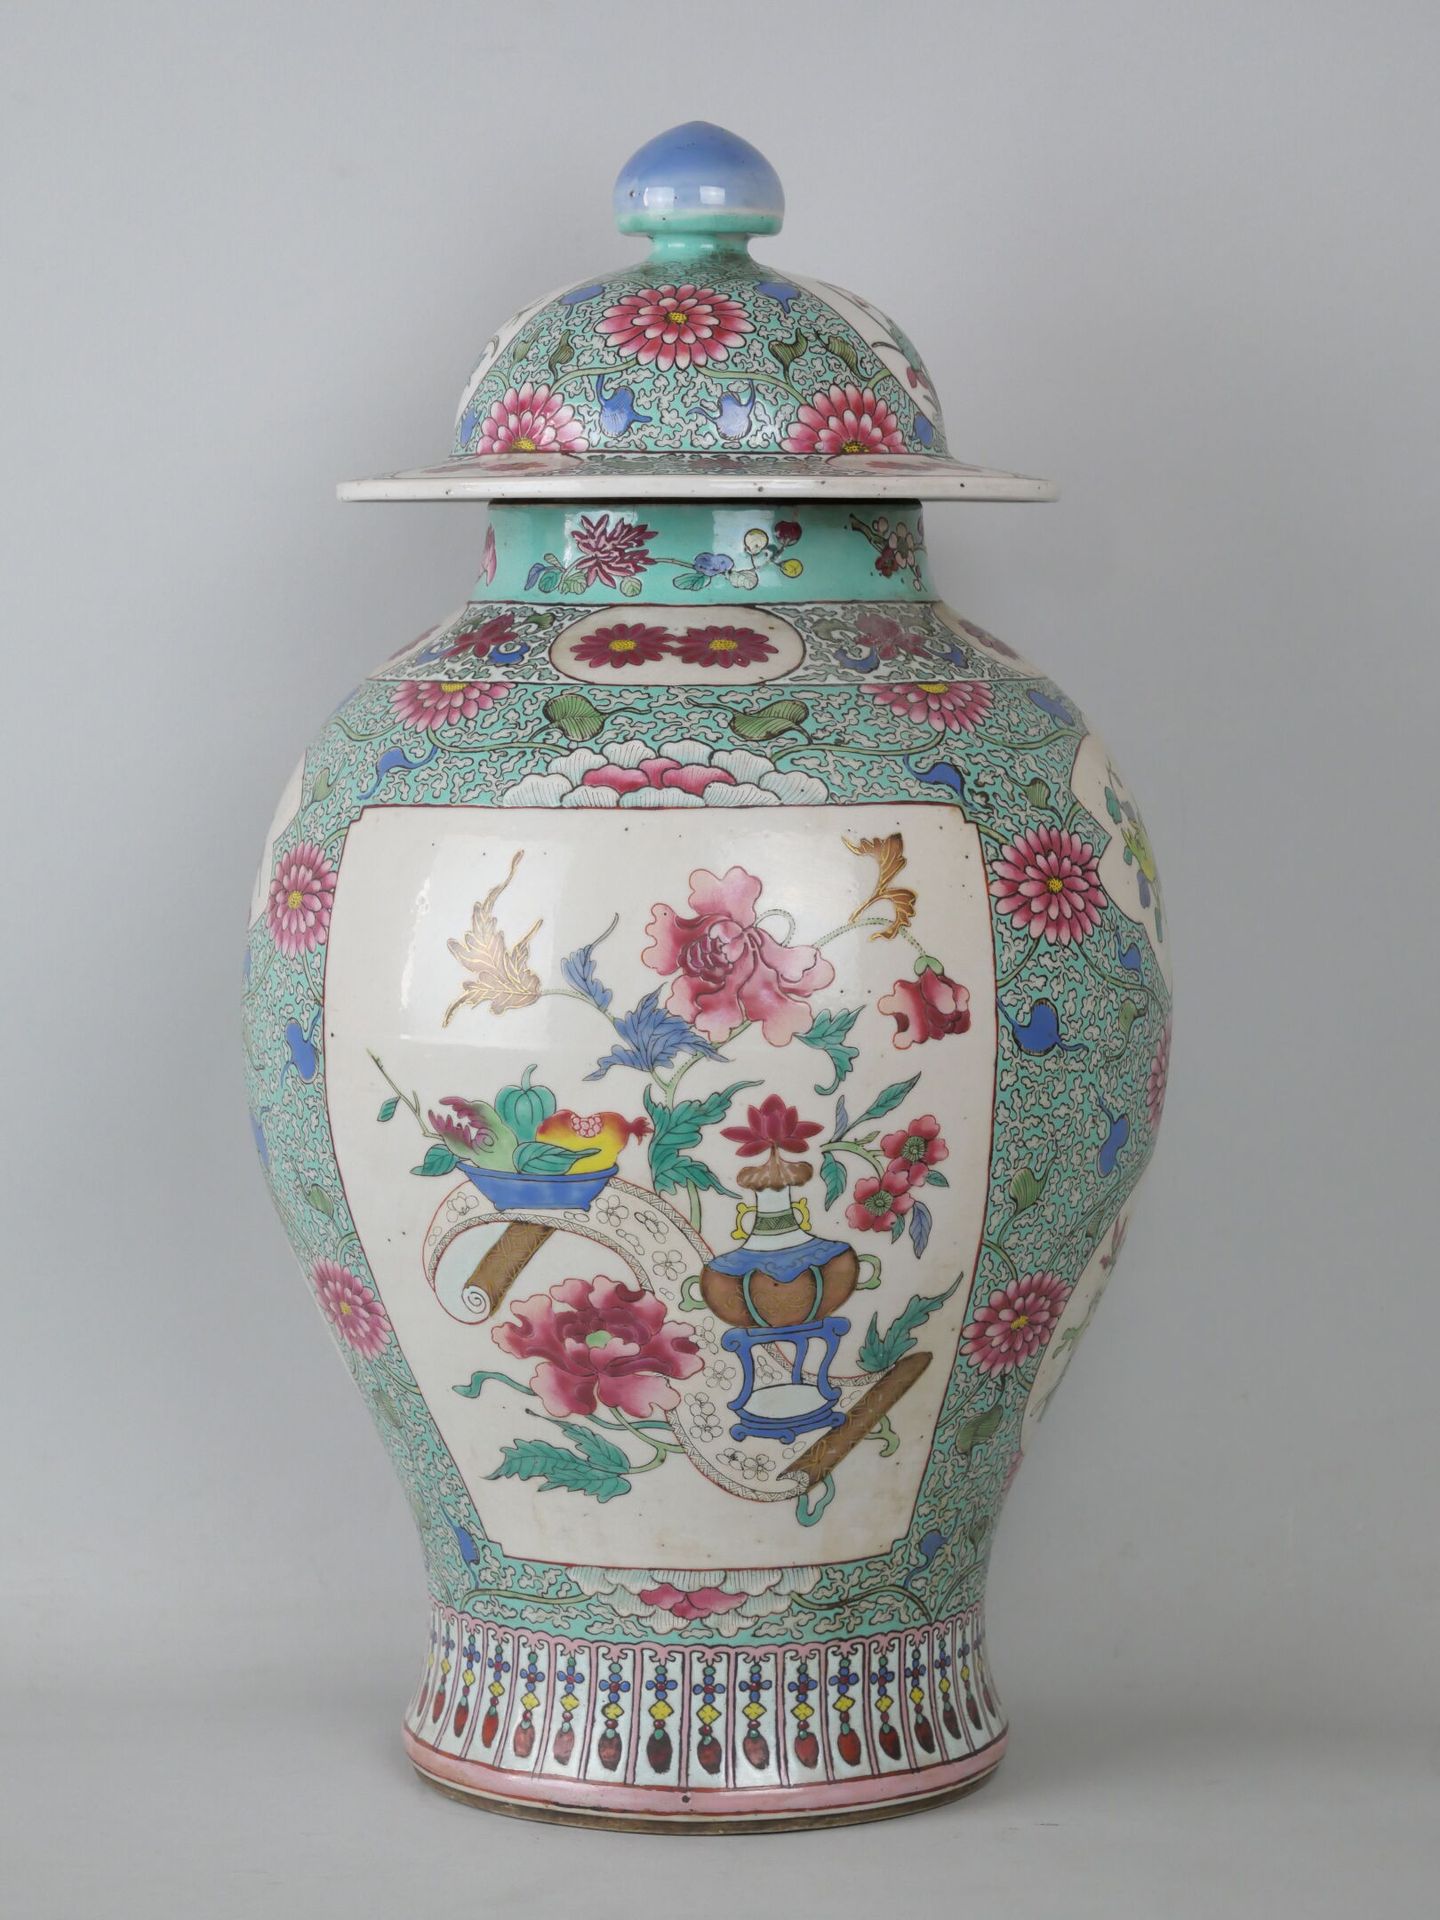 Null CHINA

Porcelain covered vase with polychrome enamelled decoration of flowe&hellip;